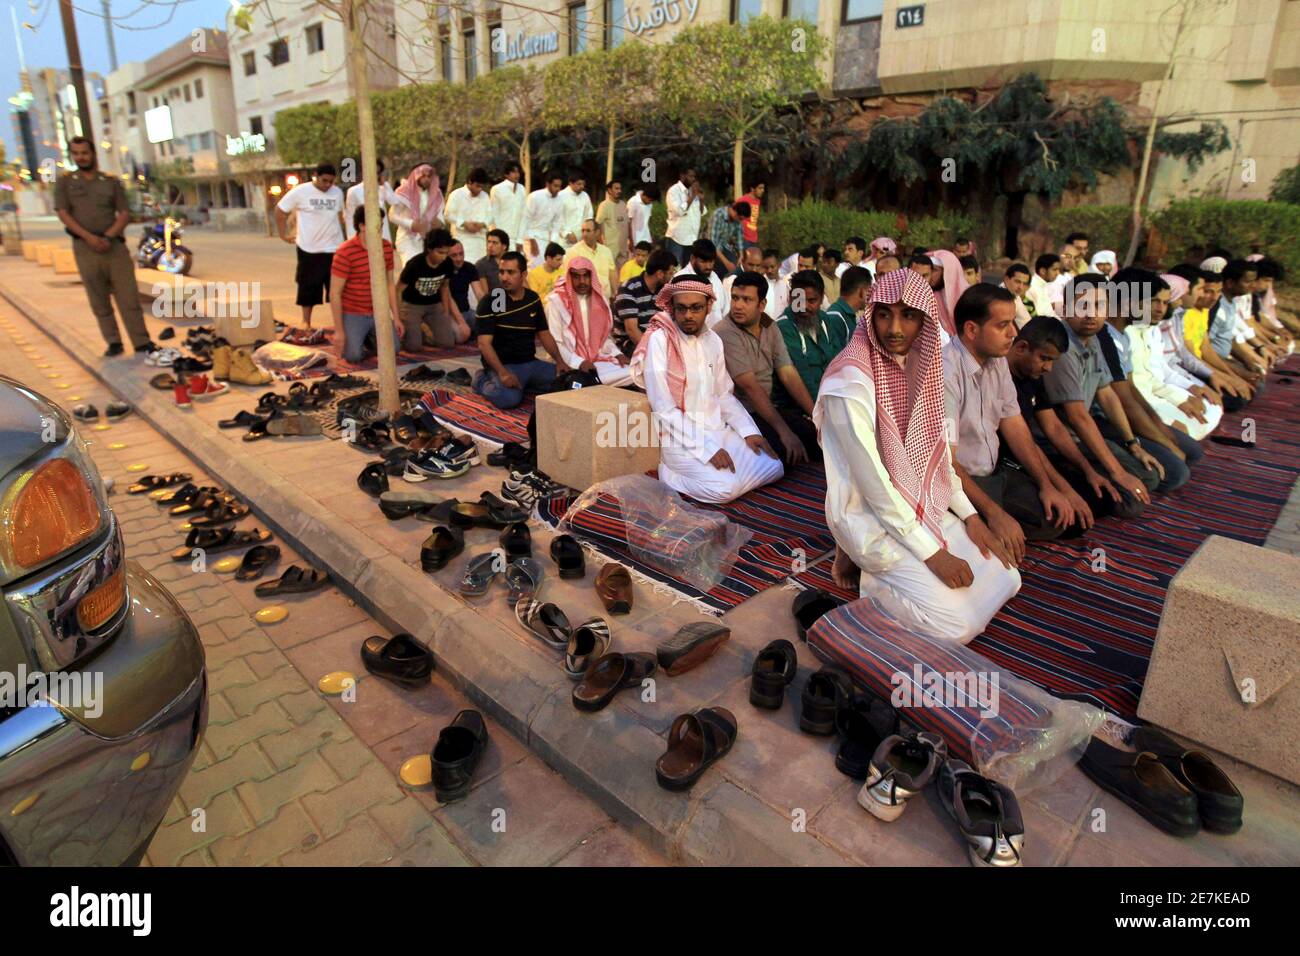 Members of the Committee for the Promotion of Virtue and Prevention of Vice, or religious police, perform dusk prayers with Saudi youth on the street outside coffee shops in Riyadh June 27, 2010. The men conducted the prayers during half-time of the World Cup soccer match between Germany and England, which they had been watching. The police have been ensuring that people watching World Cup soccer matches at the coffee shops continue to conduct their prayers during the duration of the soccer tournament. REUTERS/Fahad Shadeed (SAUDI ARABIA - Tags: SPORT SOCCER WORLD CUP RELIGION IMAGES OF THE DA Foto Stock